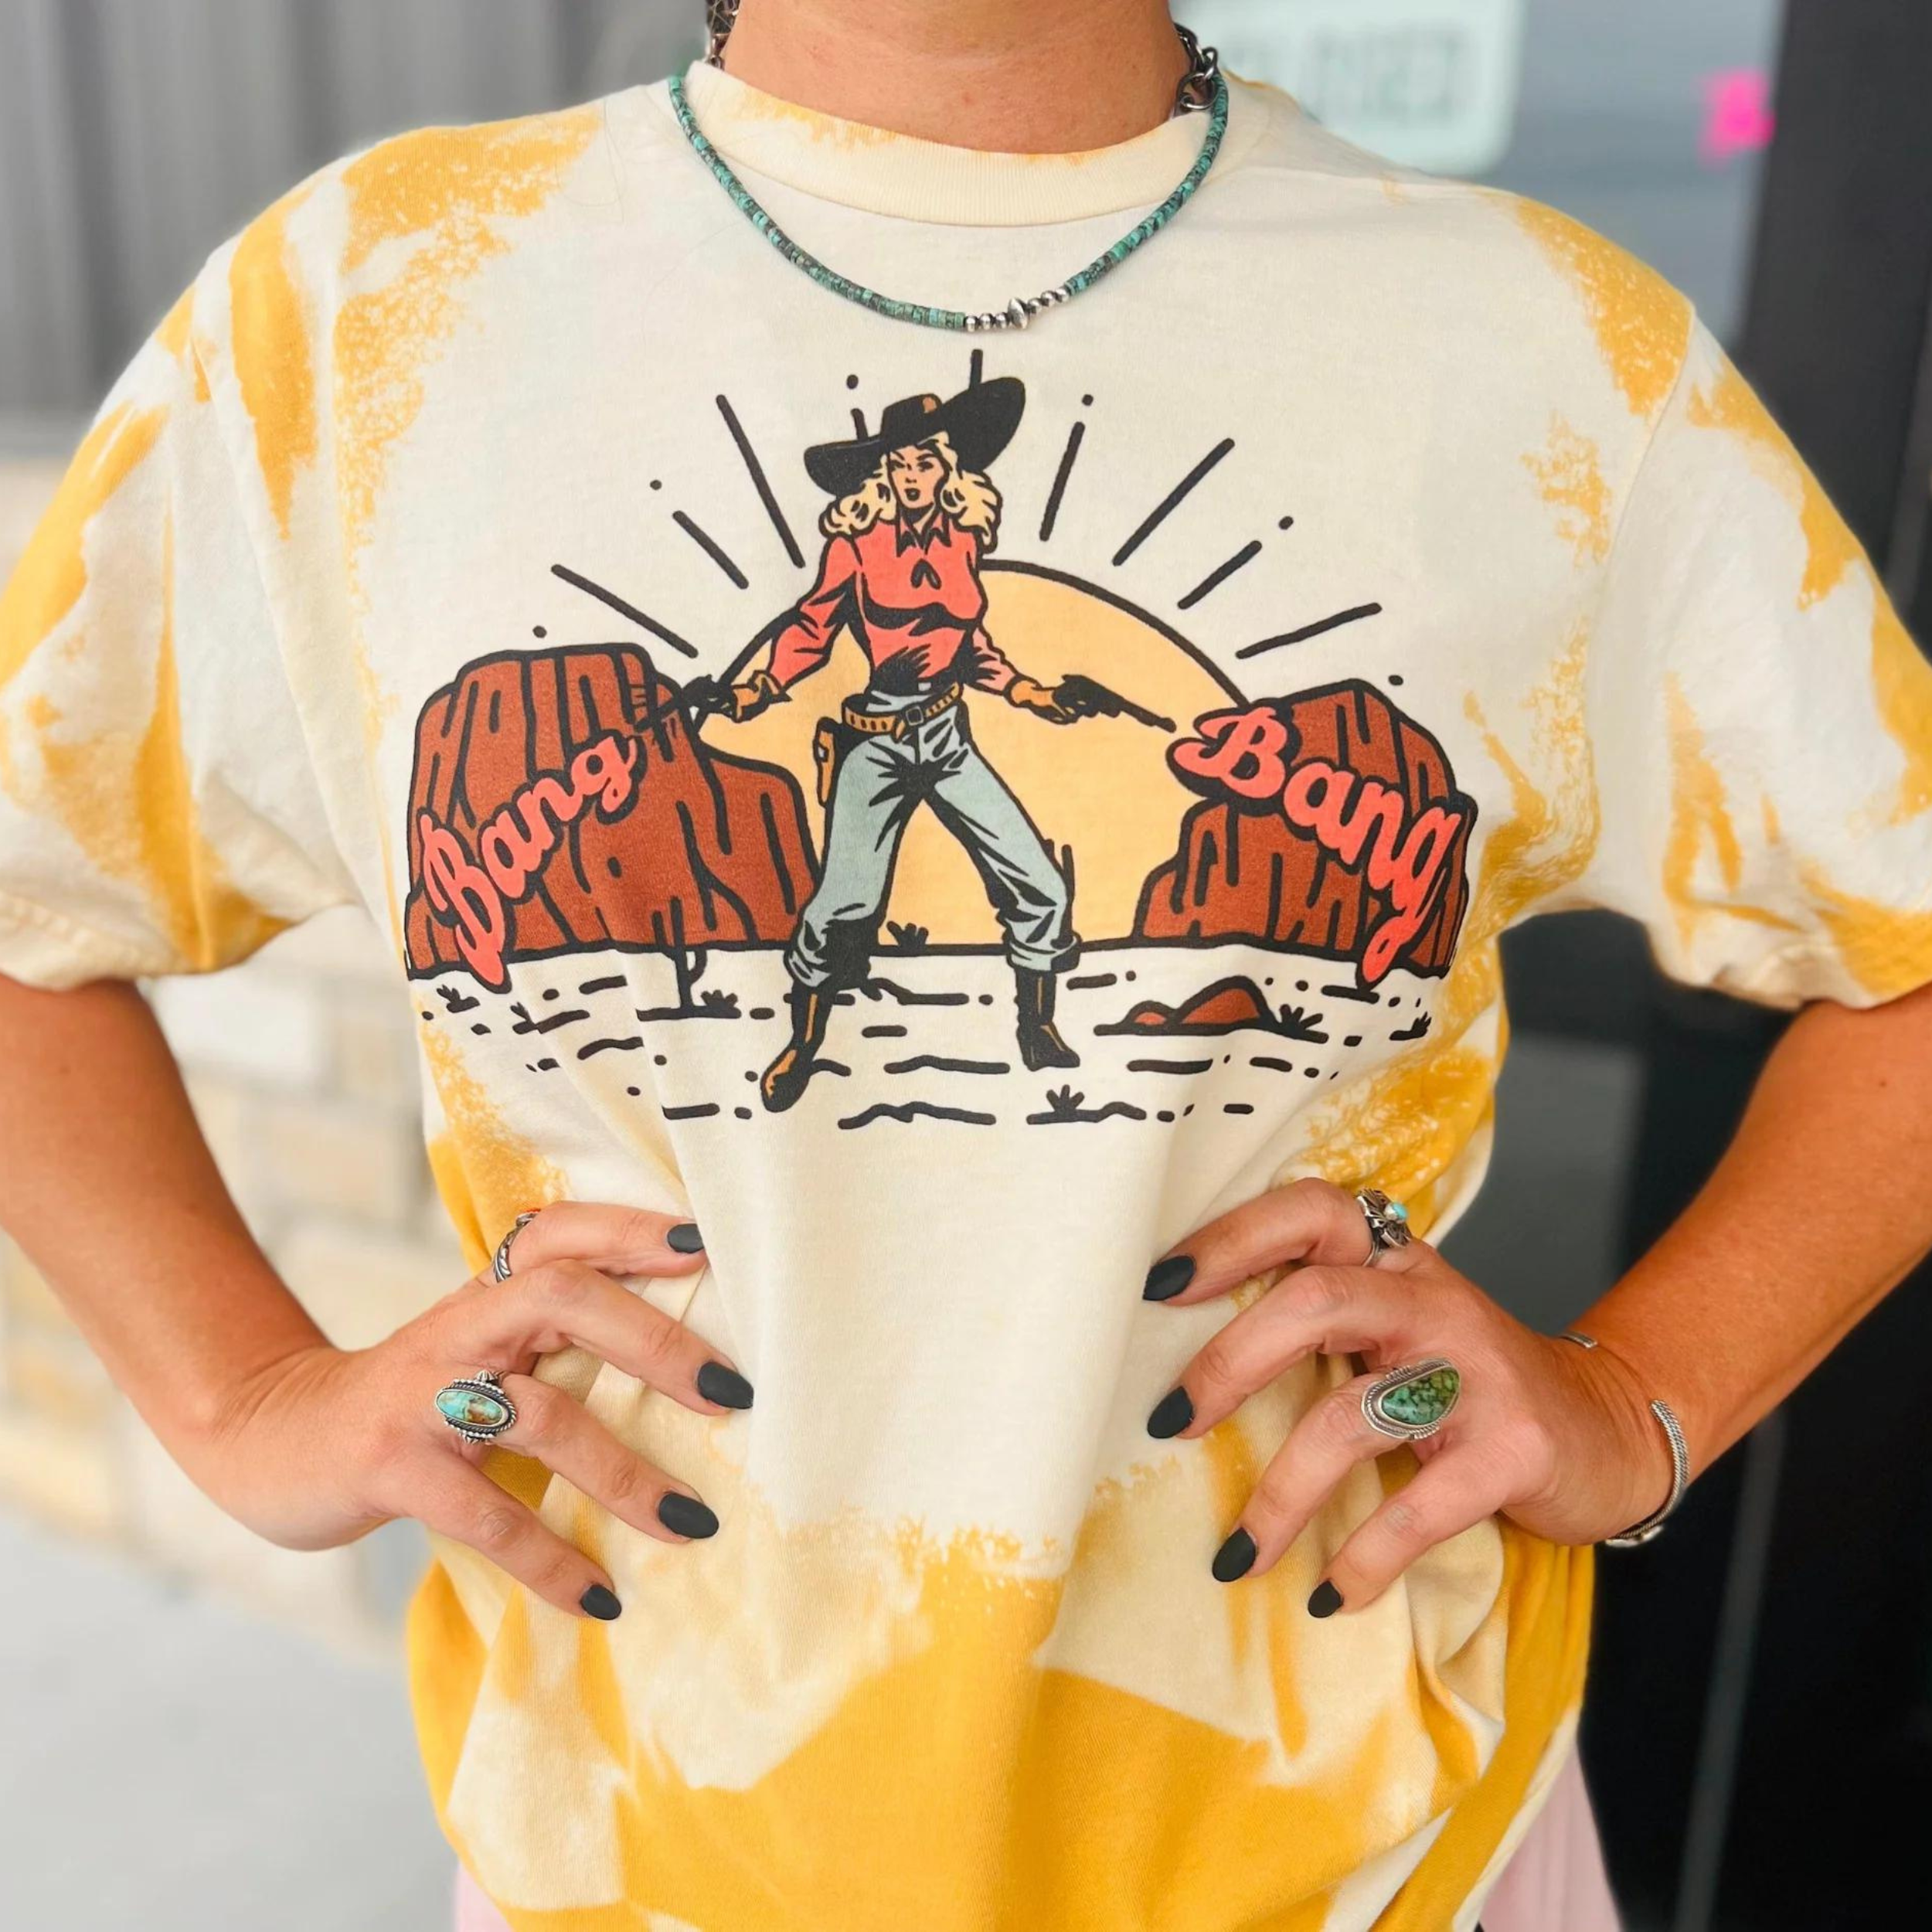 A mustard yellow tee with a bleached design. Featuring a cowgirl in a desert sunset wearing a hat, red shirt, blue jeans, and boots. The words "Bang Bang" are seen on either side of the cowgirl. Item is pictured on a casual background with hints of grey, white, and black.  